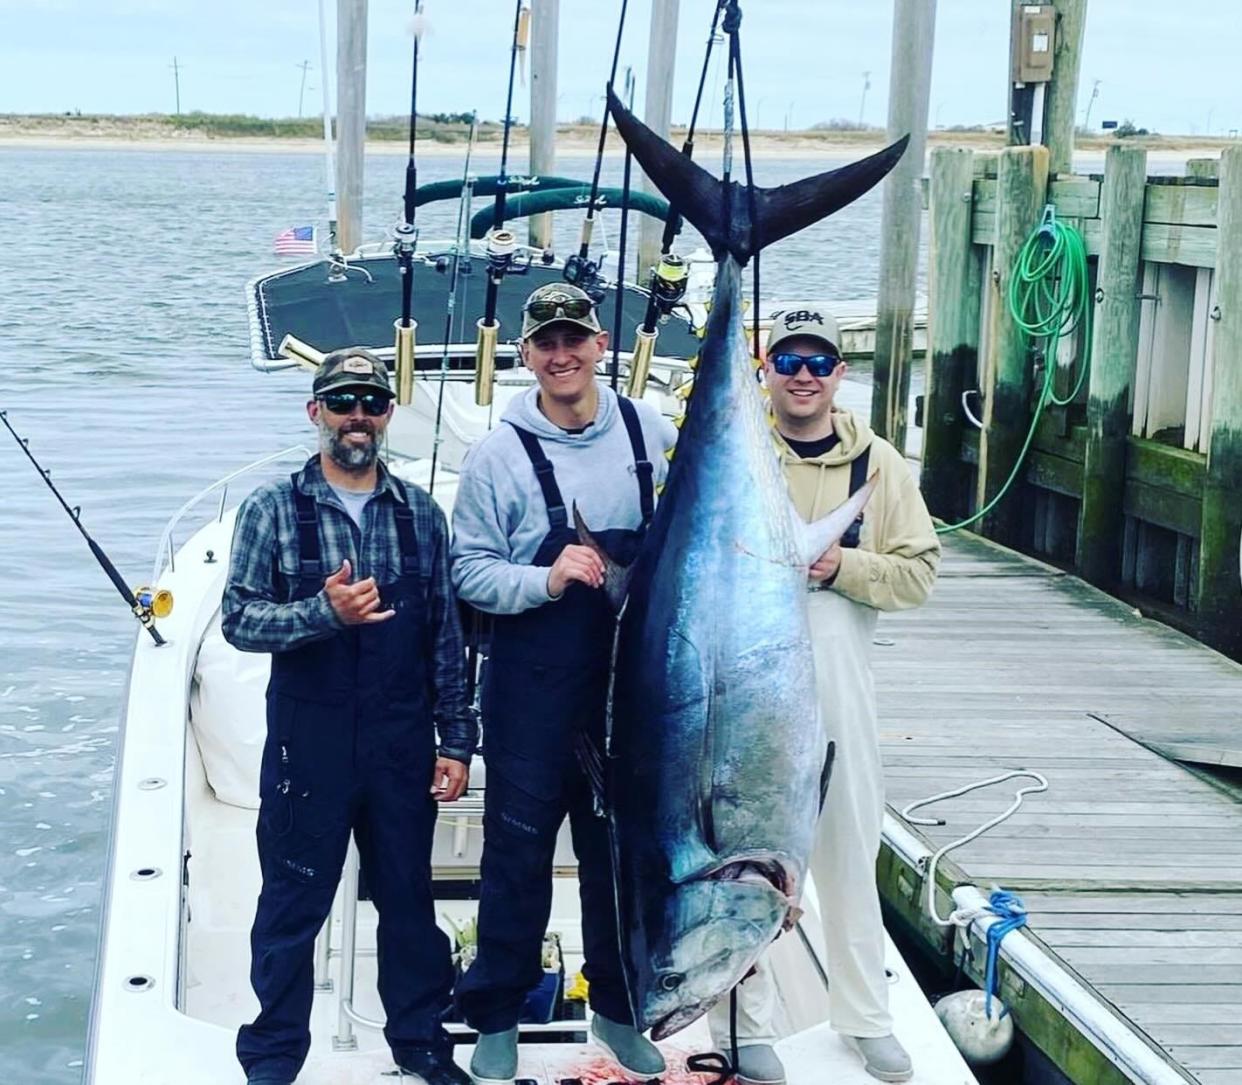 F. J. Lentile, Michael Nolan and Robert Skudera with their catch of a giant bluefin tuna on April 28.